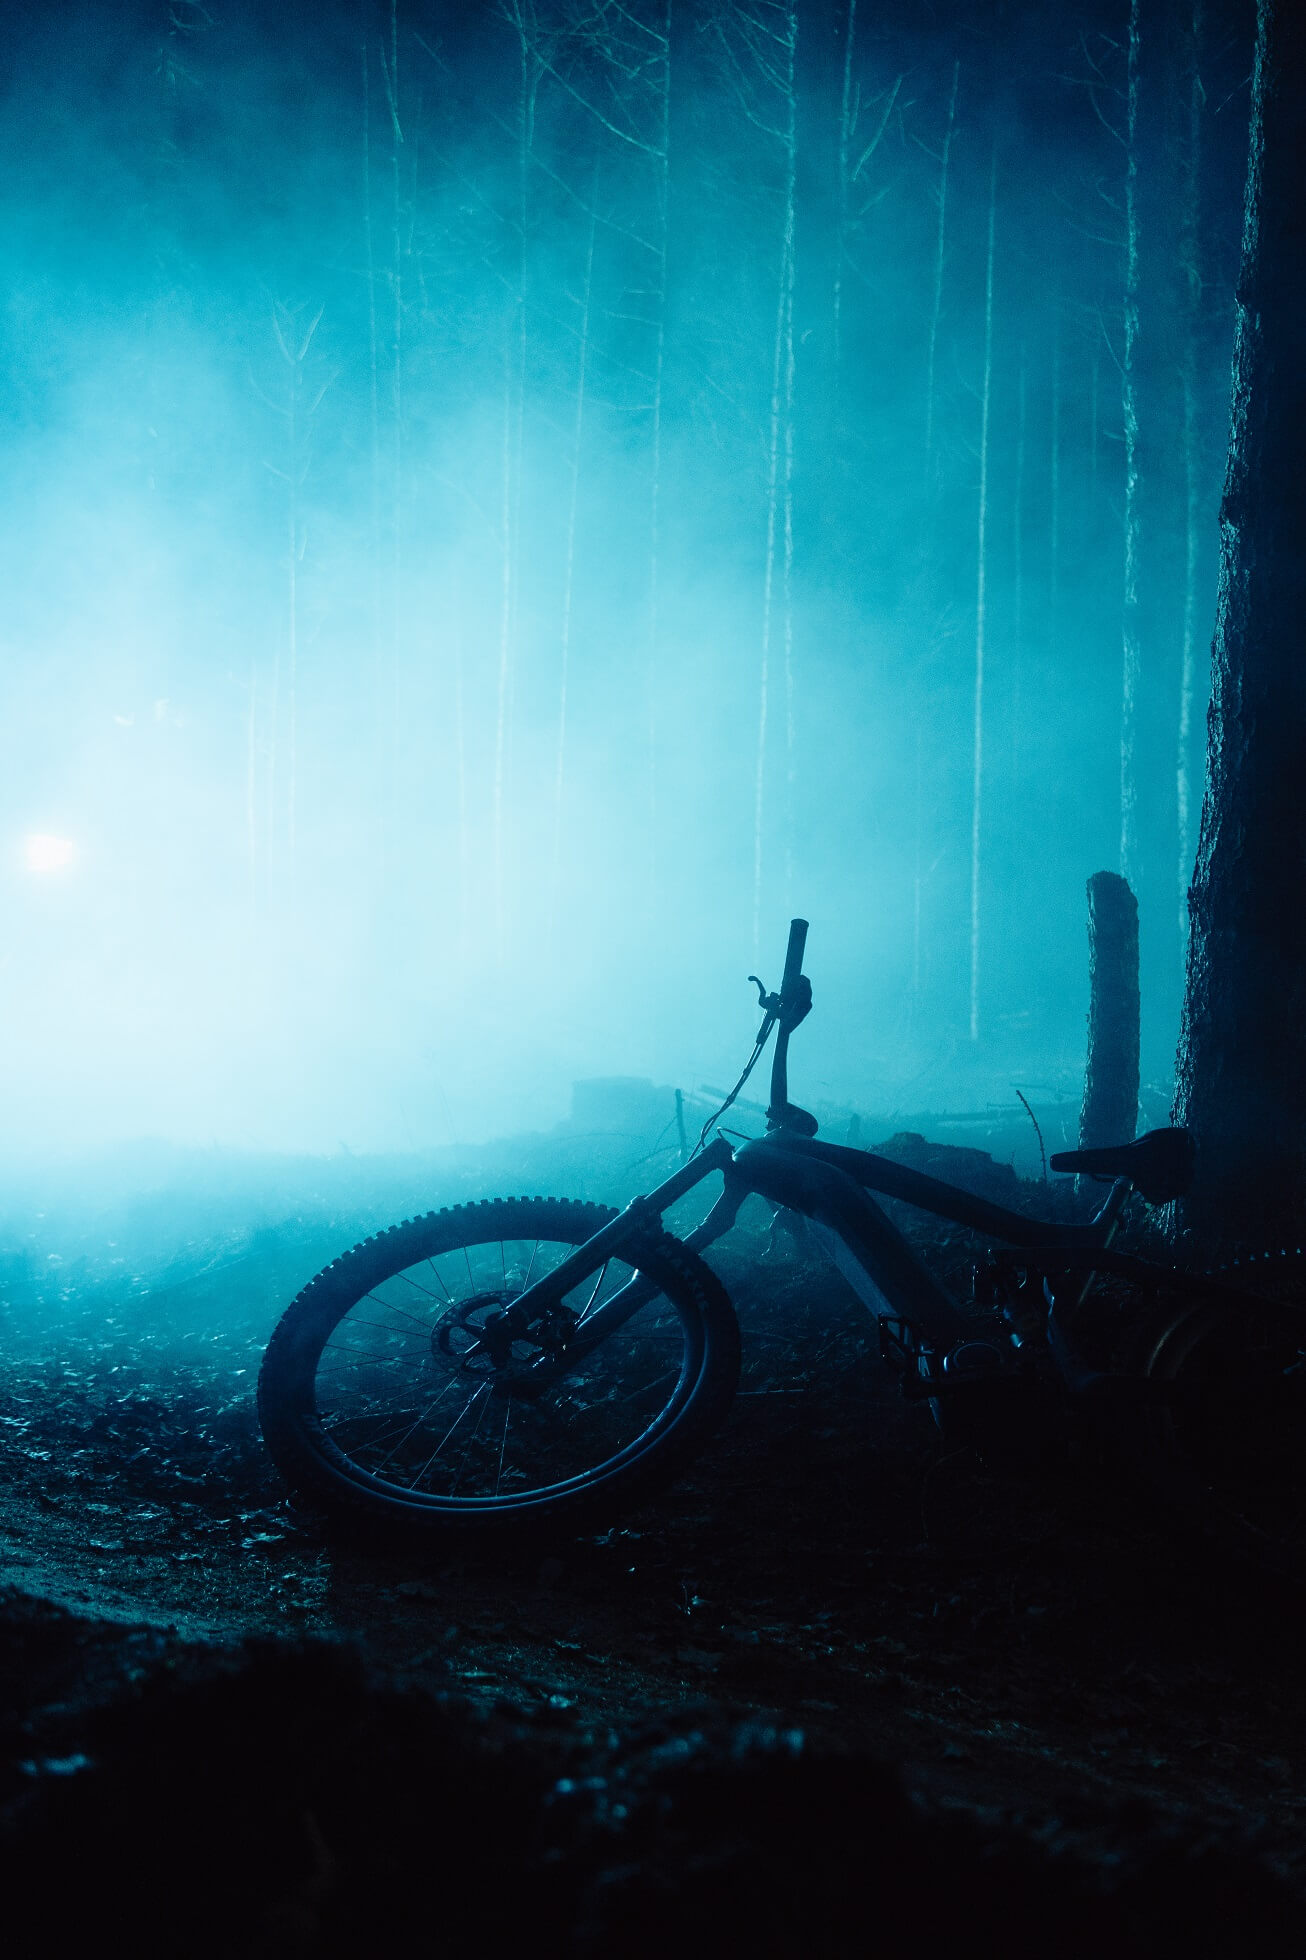 Mountain bike laying in a dark, slightly foggy forest with blue light in the background